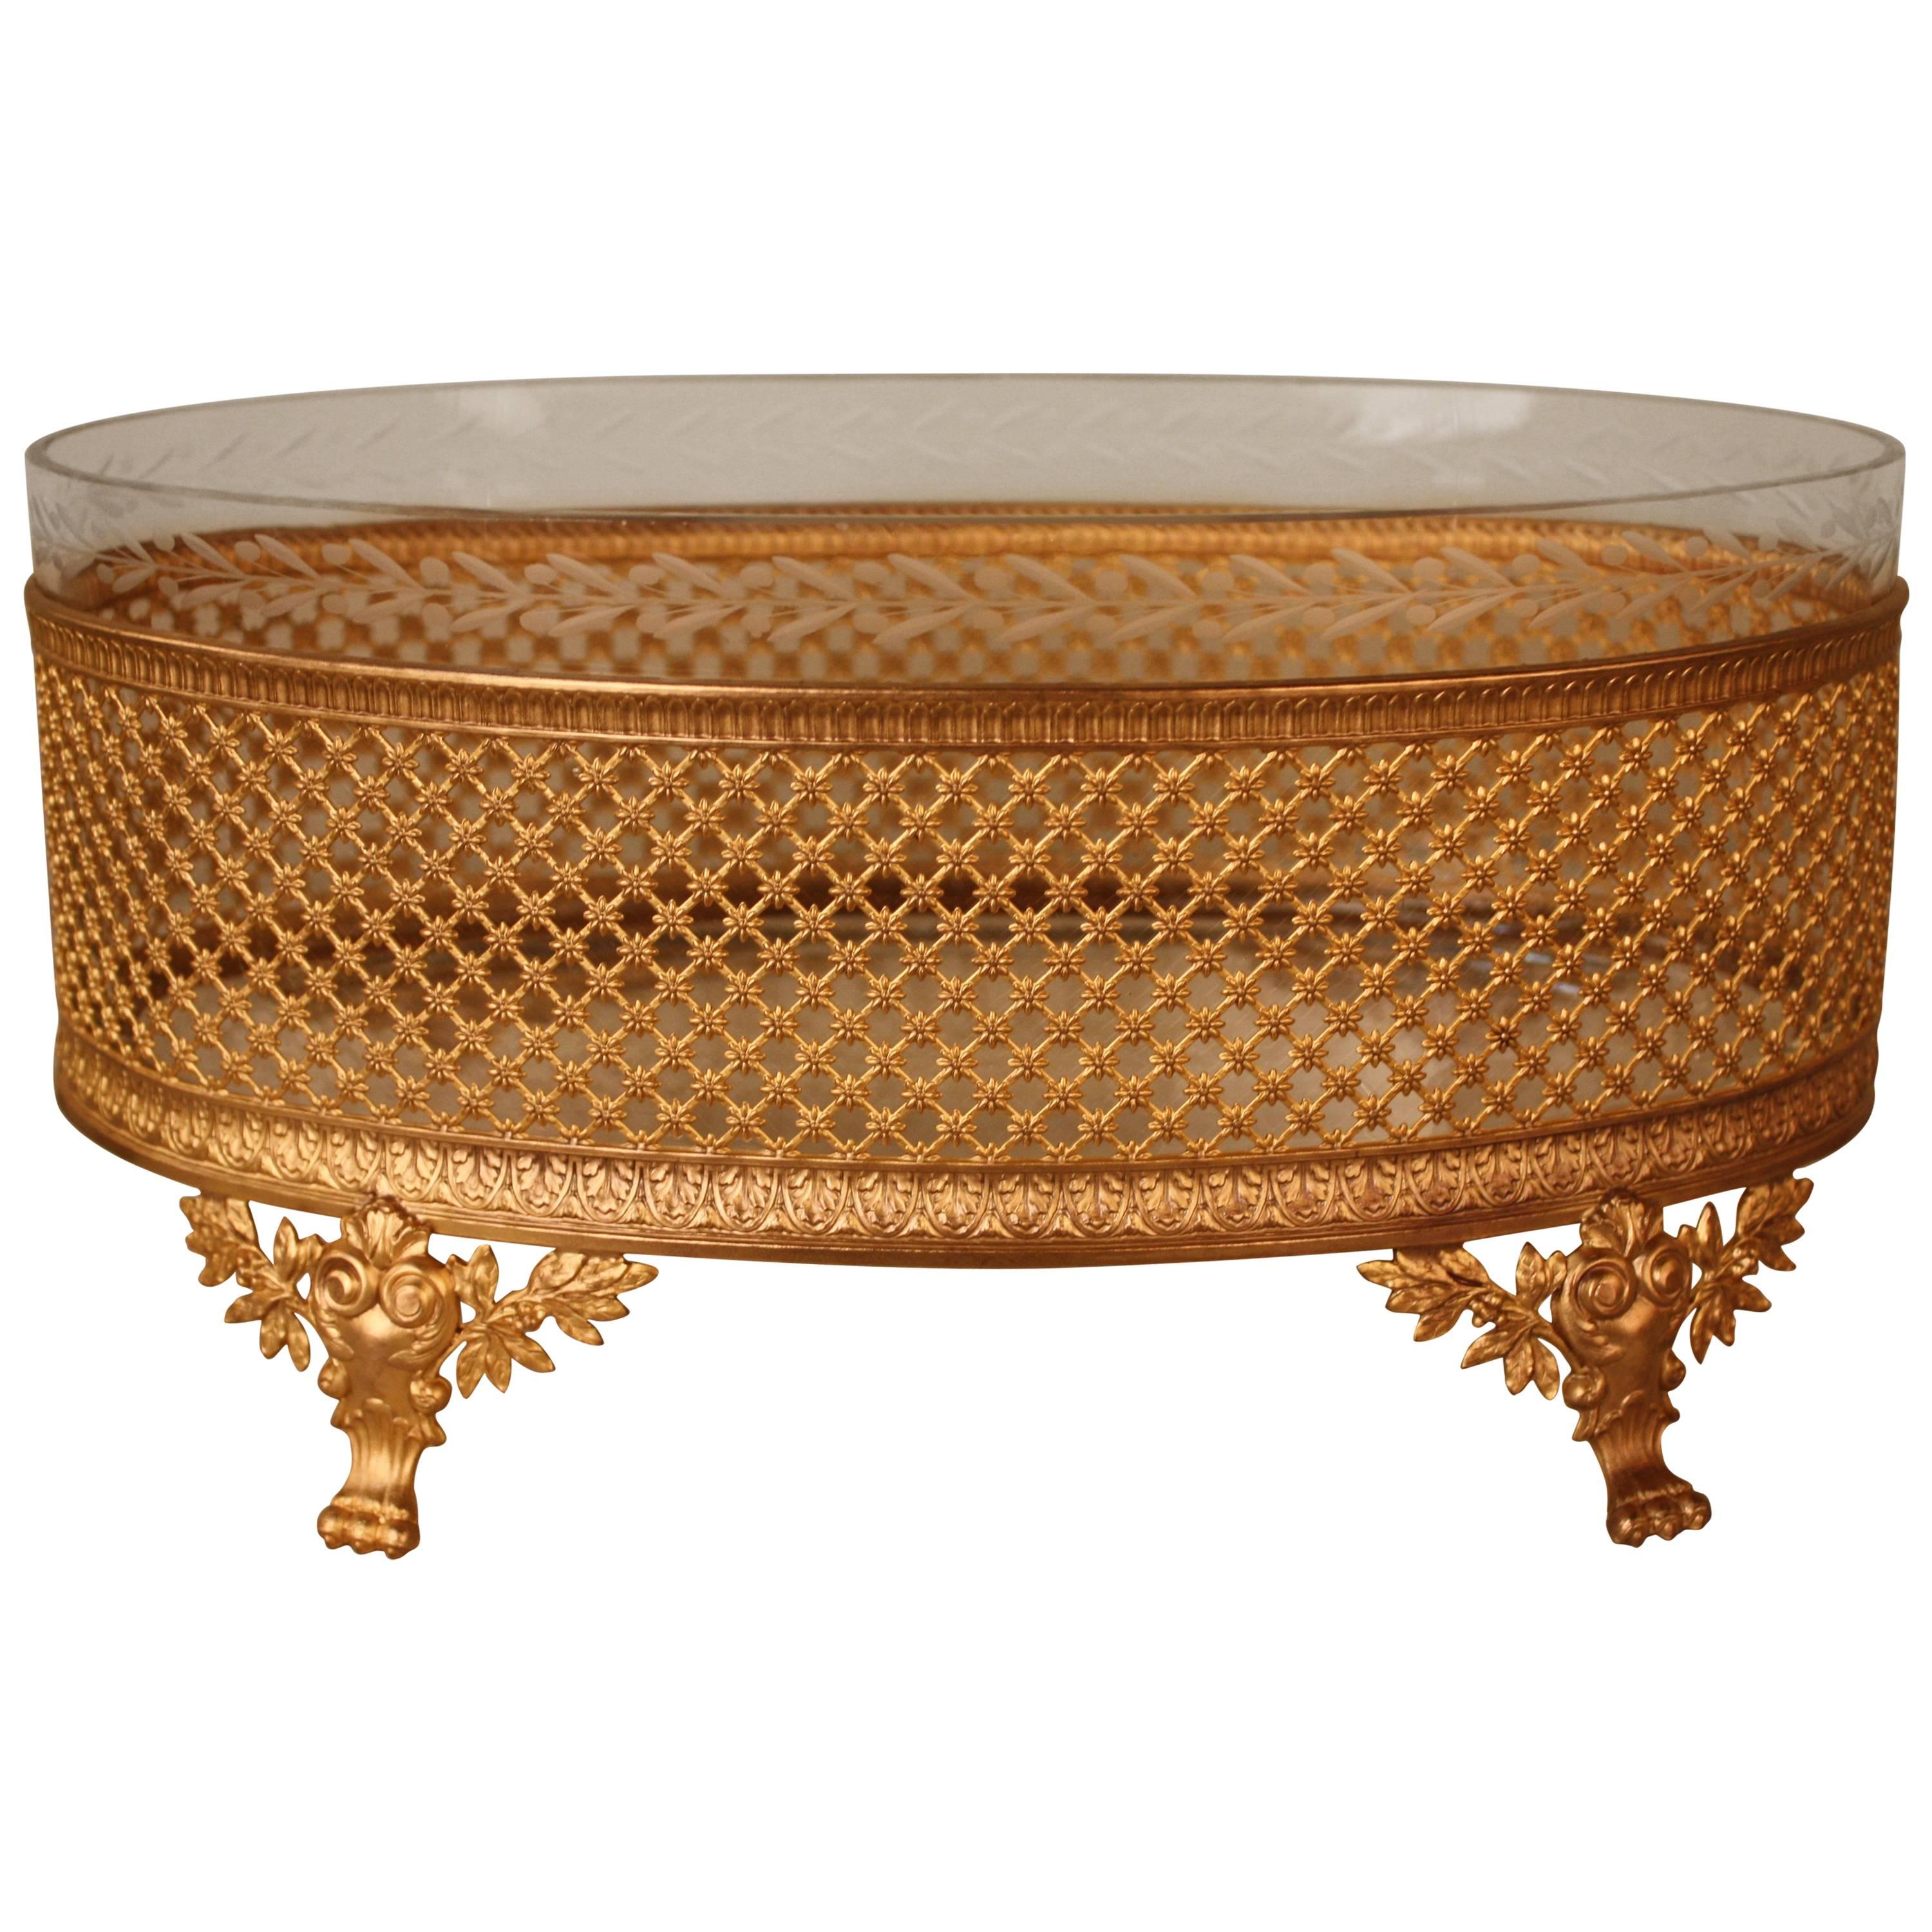 French Empire Cut Crystal Gilt Bronze Mounted Centerpiece